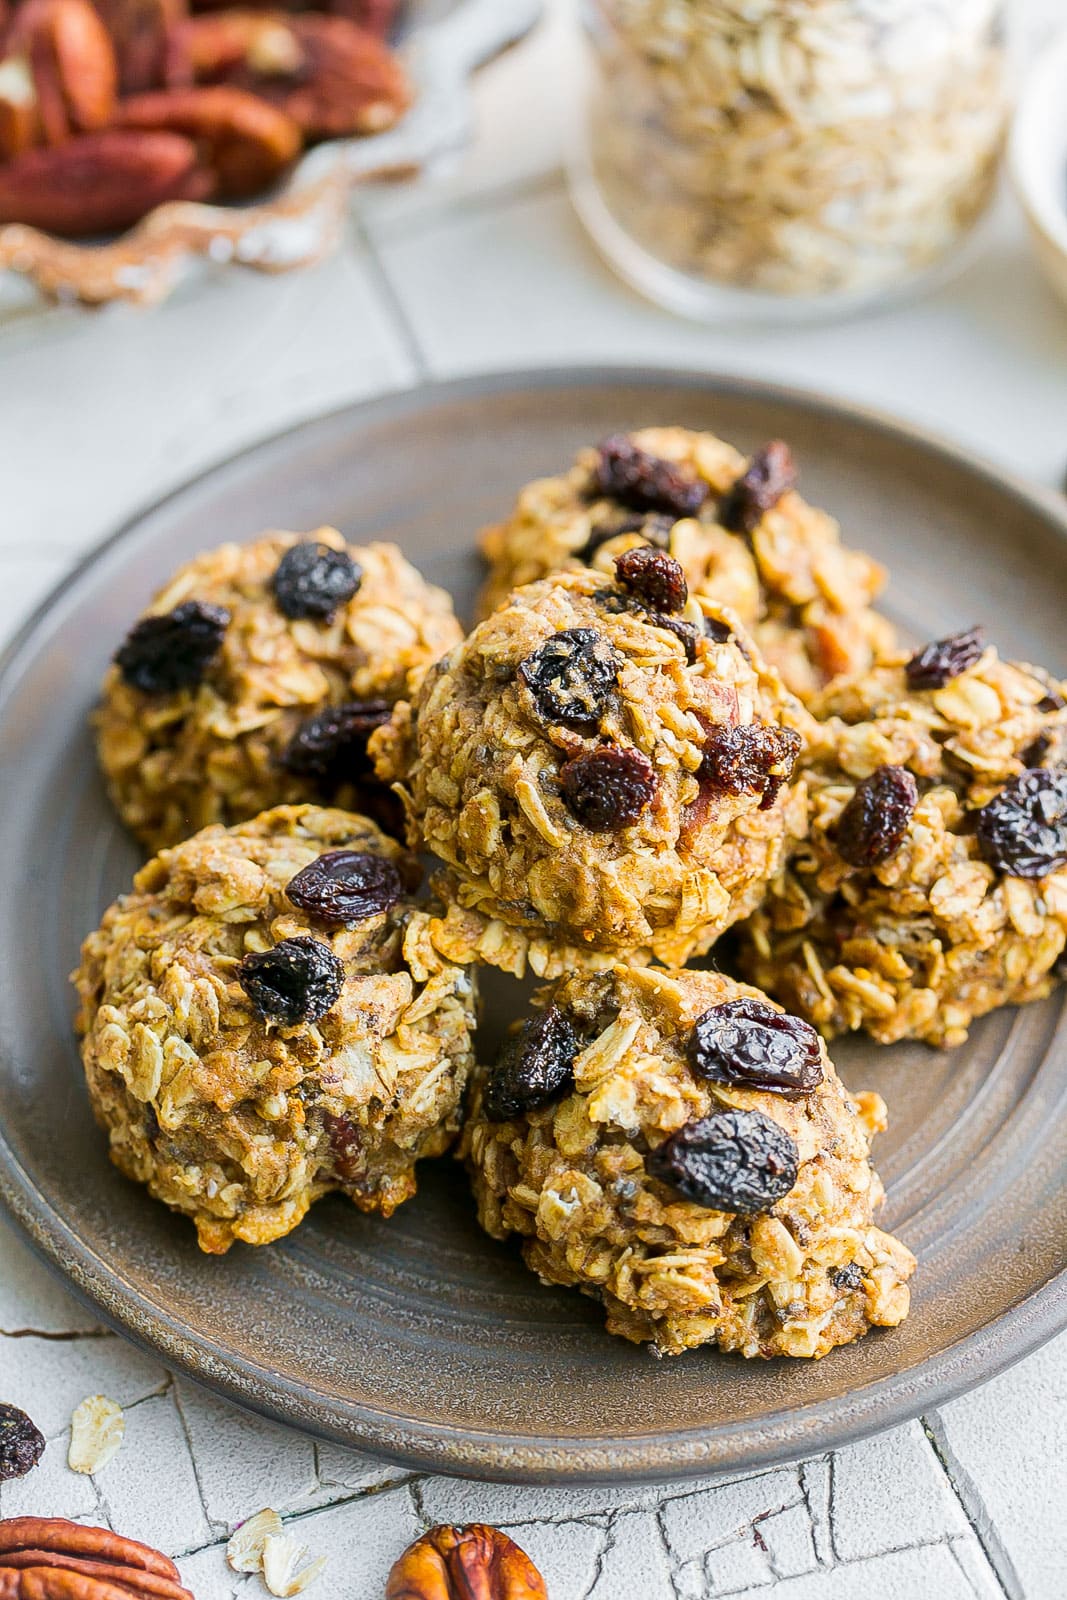 Oatmeal cookie with raisins on plate.